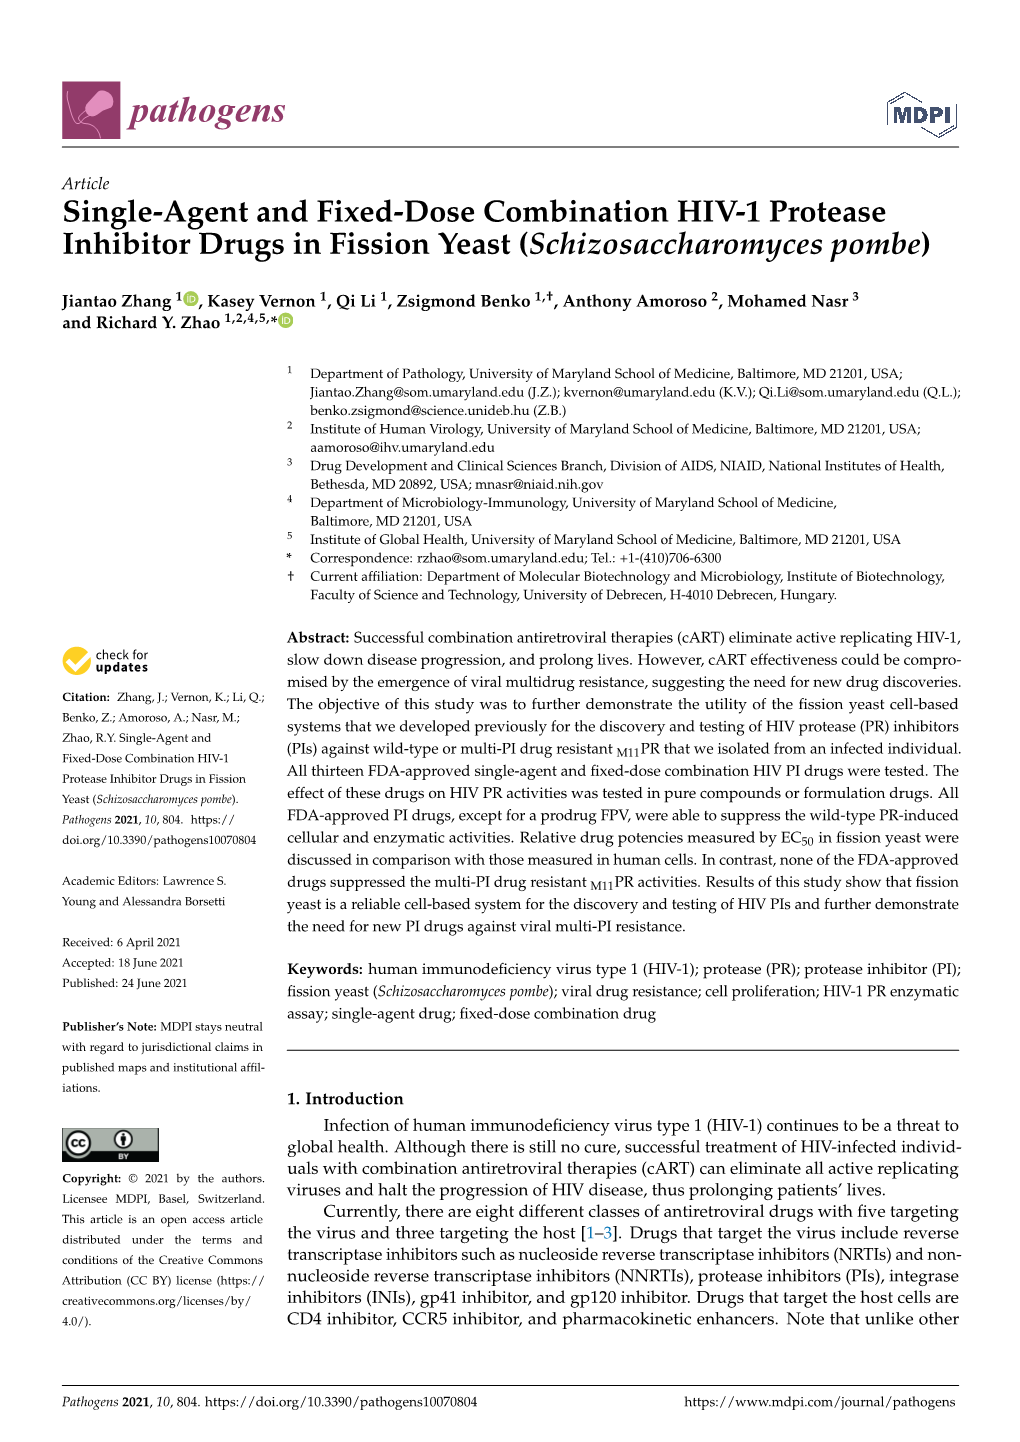 Single-Agent and Fixed-Dose Combination HIV-1 Protease Inhibitor Drugs in Fission Yeast (Schizosaccharomyces Pombe)